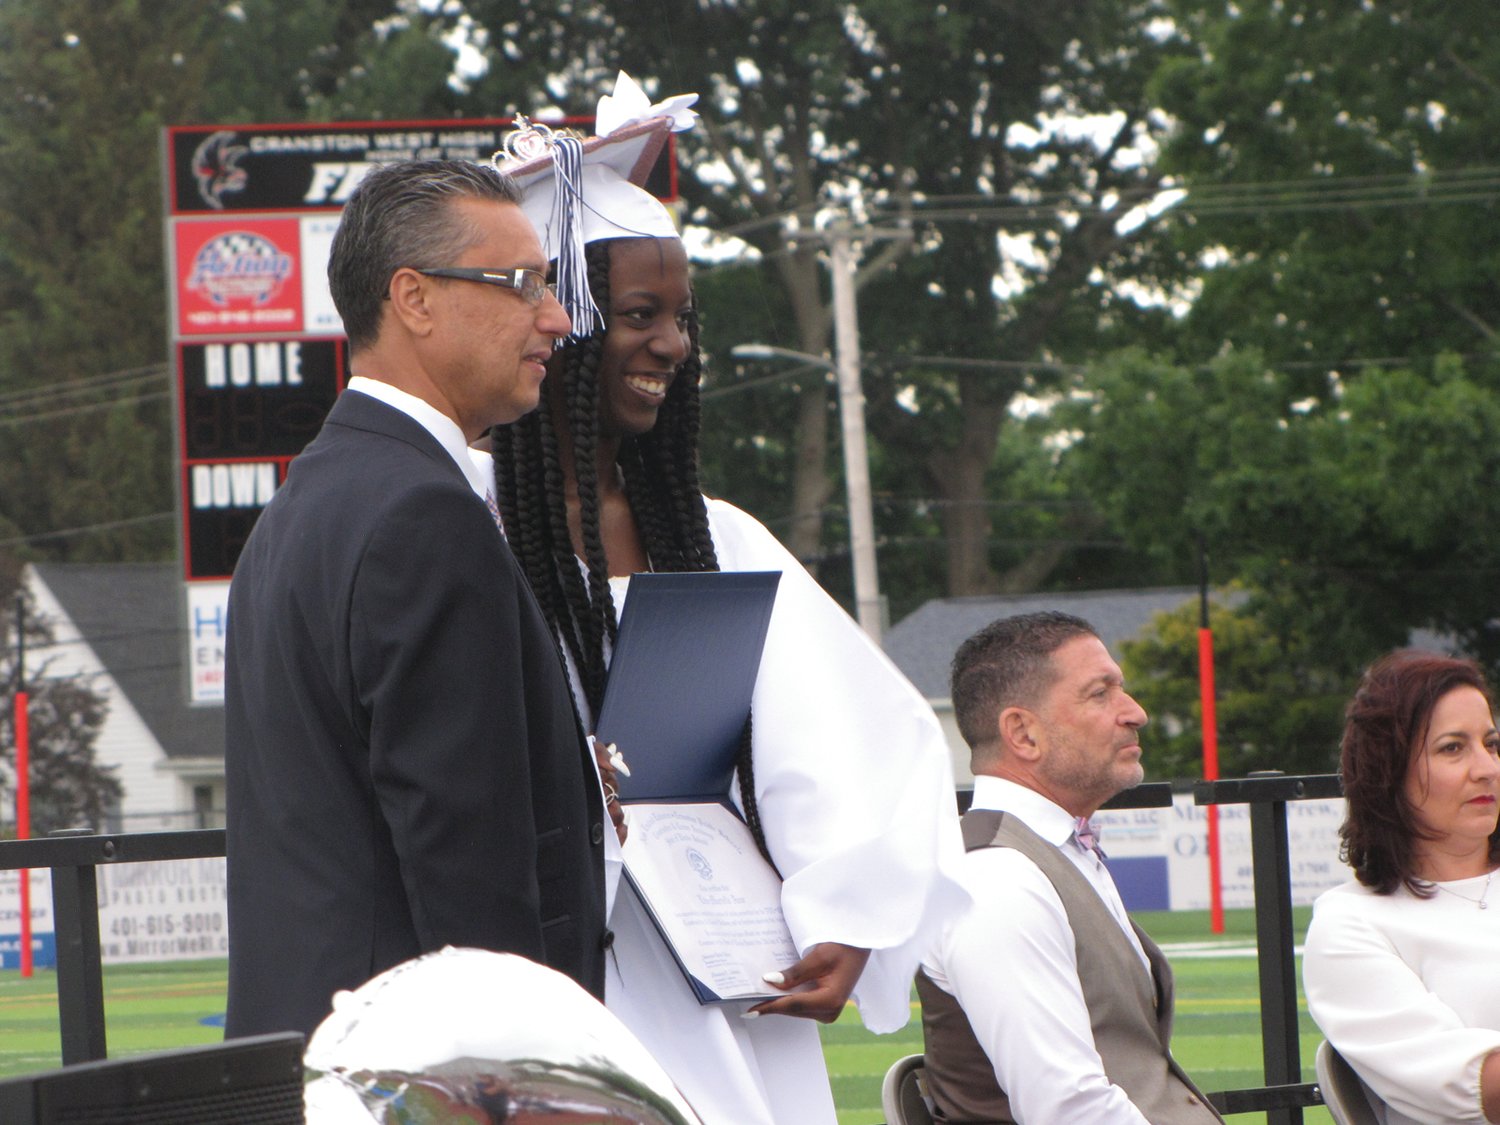 CAPTURING THE MOMENT: Litz-Murielle Azor poses with NEL/CPS Executive Director
Ramon Torres after receiving her diploma Friday. (Herald photos by Daniel Kittredge